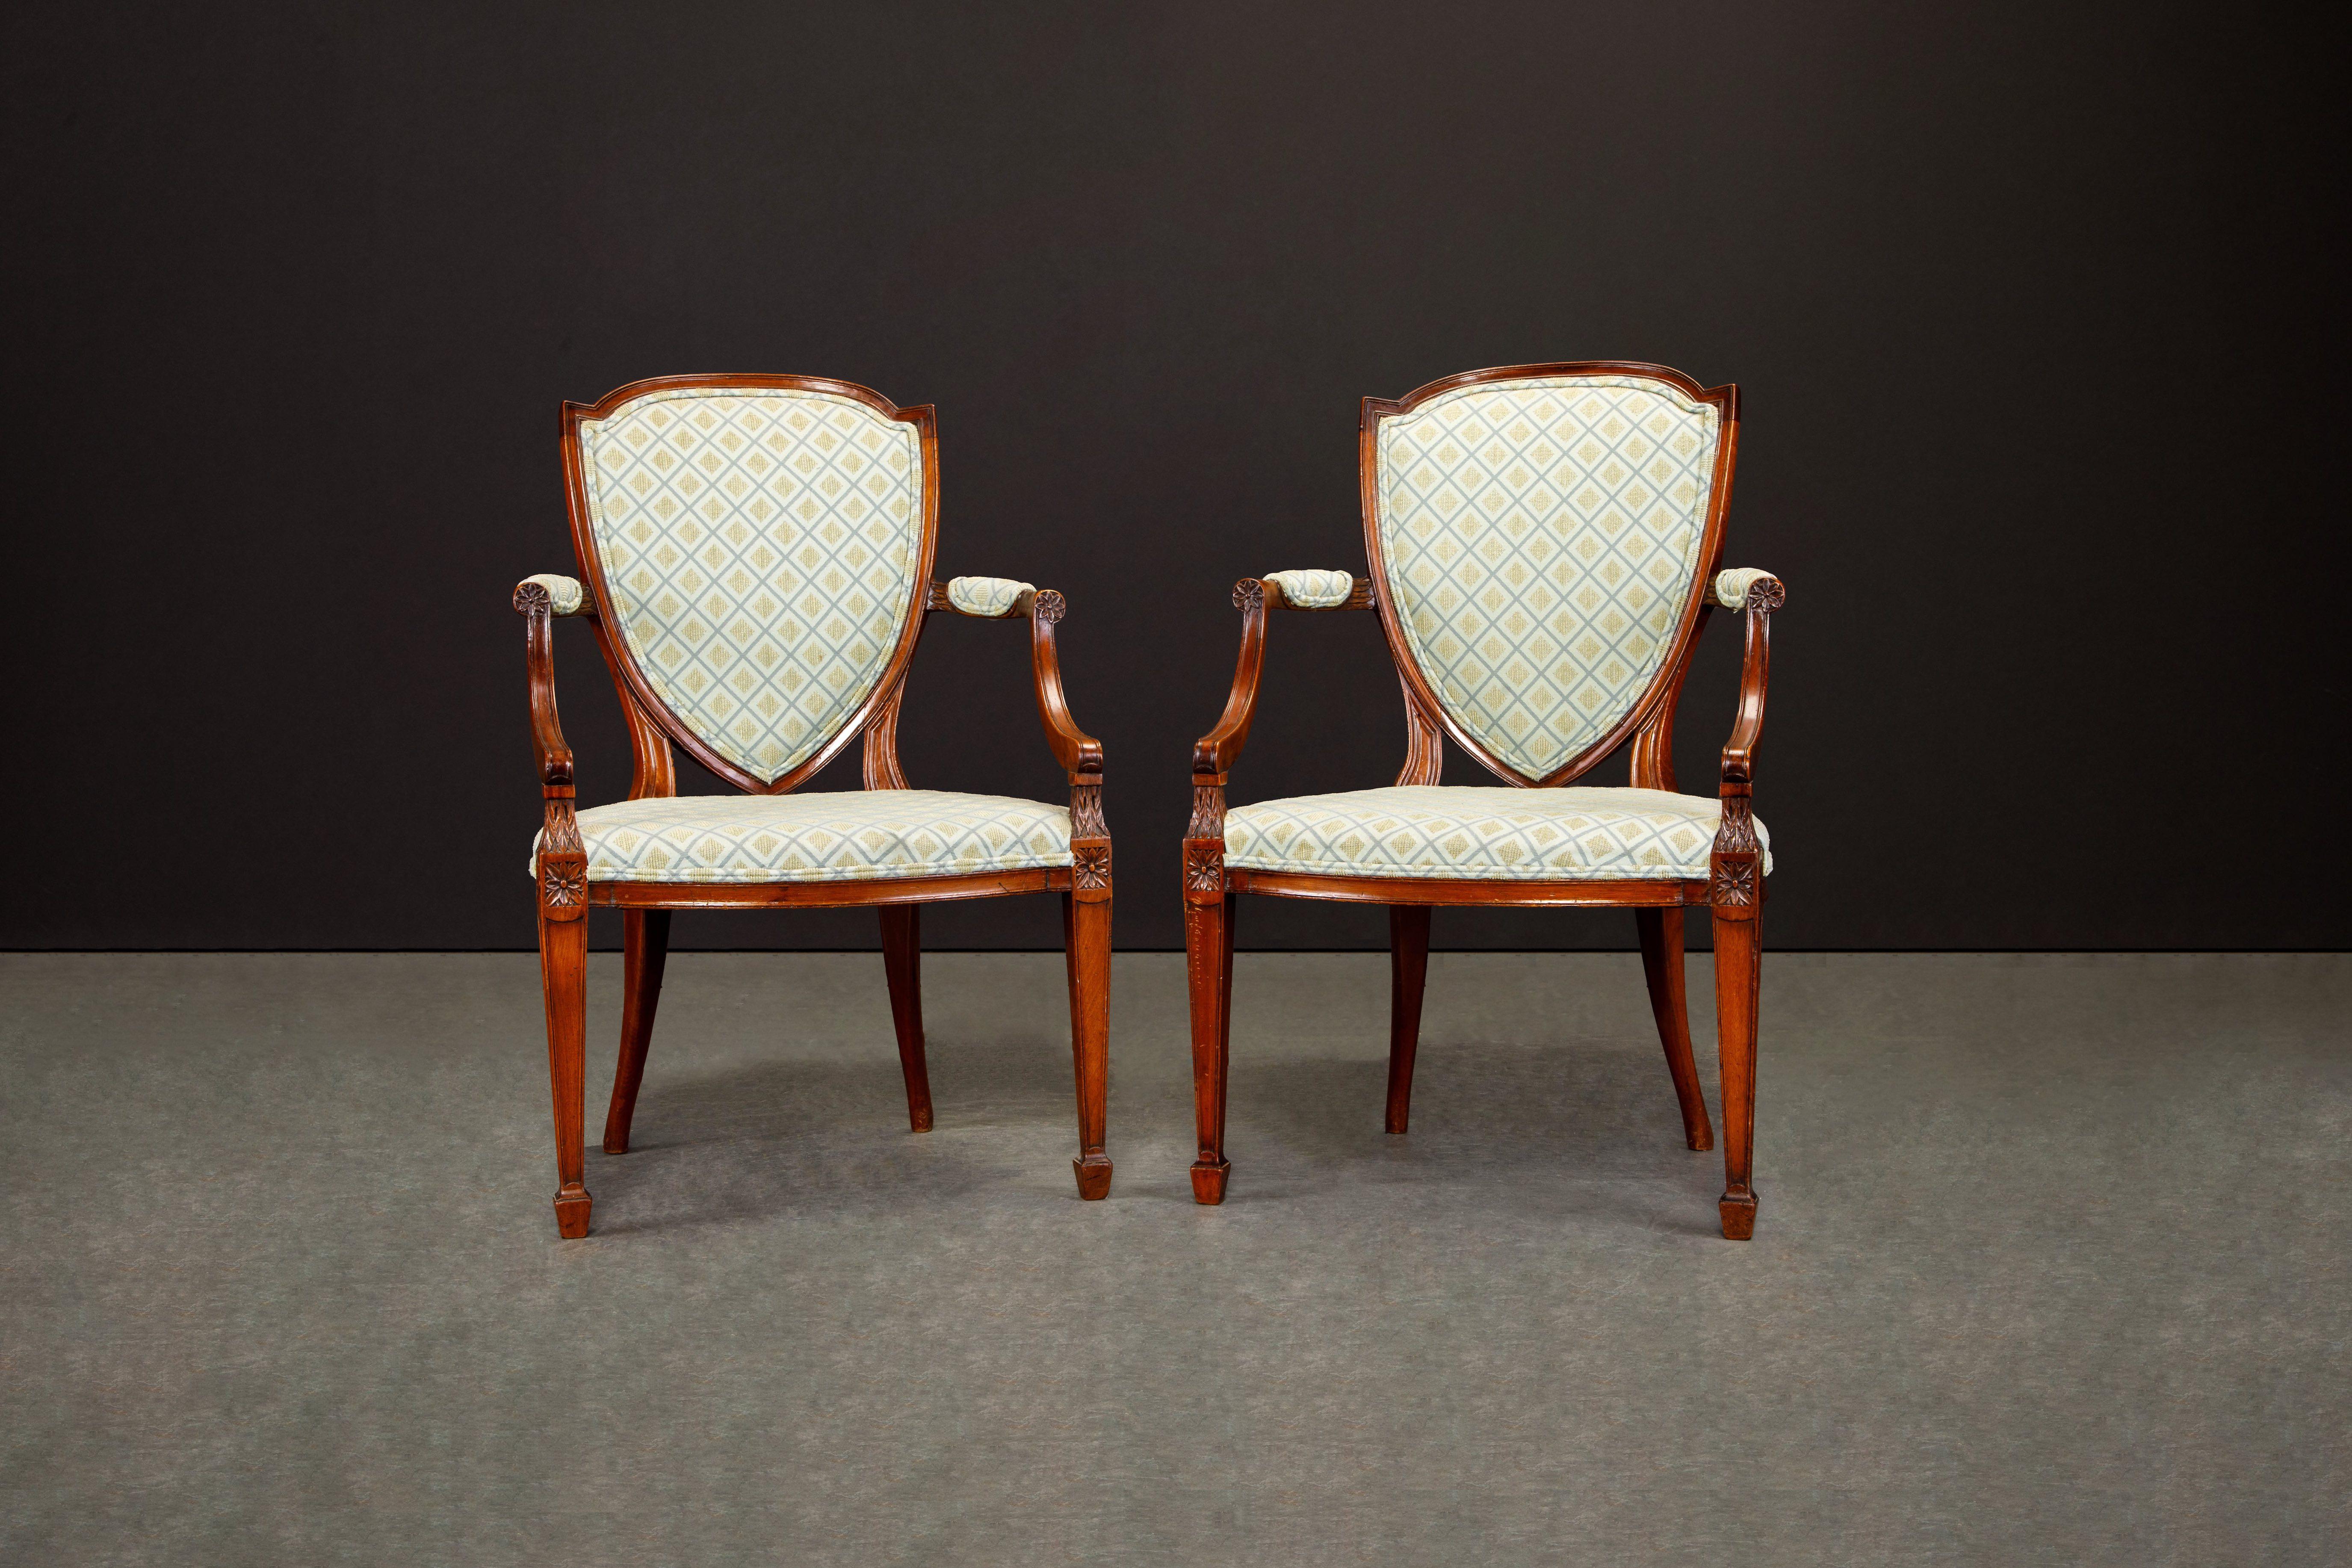 This exquisite pair of circa 1870s Hepplewhite style 'Shield-Back' armchairs are exquisite. We believe the wood to be crafted from solid Mahogany with intricate detailed carved details. 

The upholstered back and arms provide additional comfort